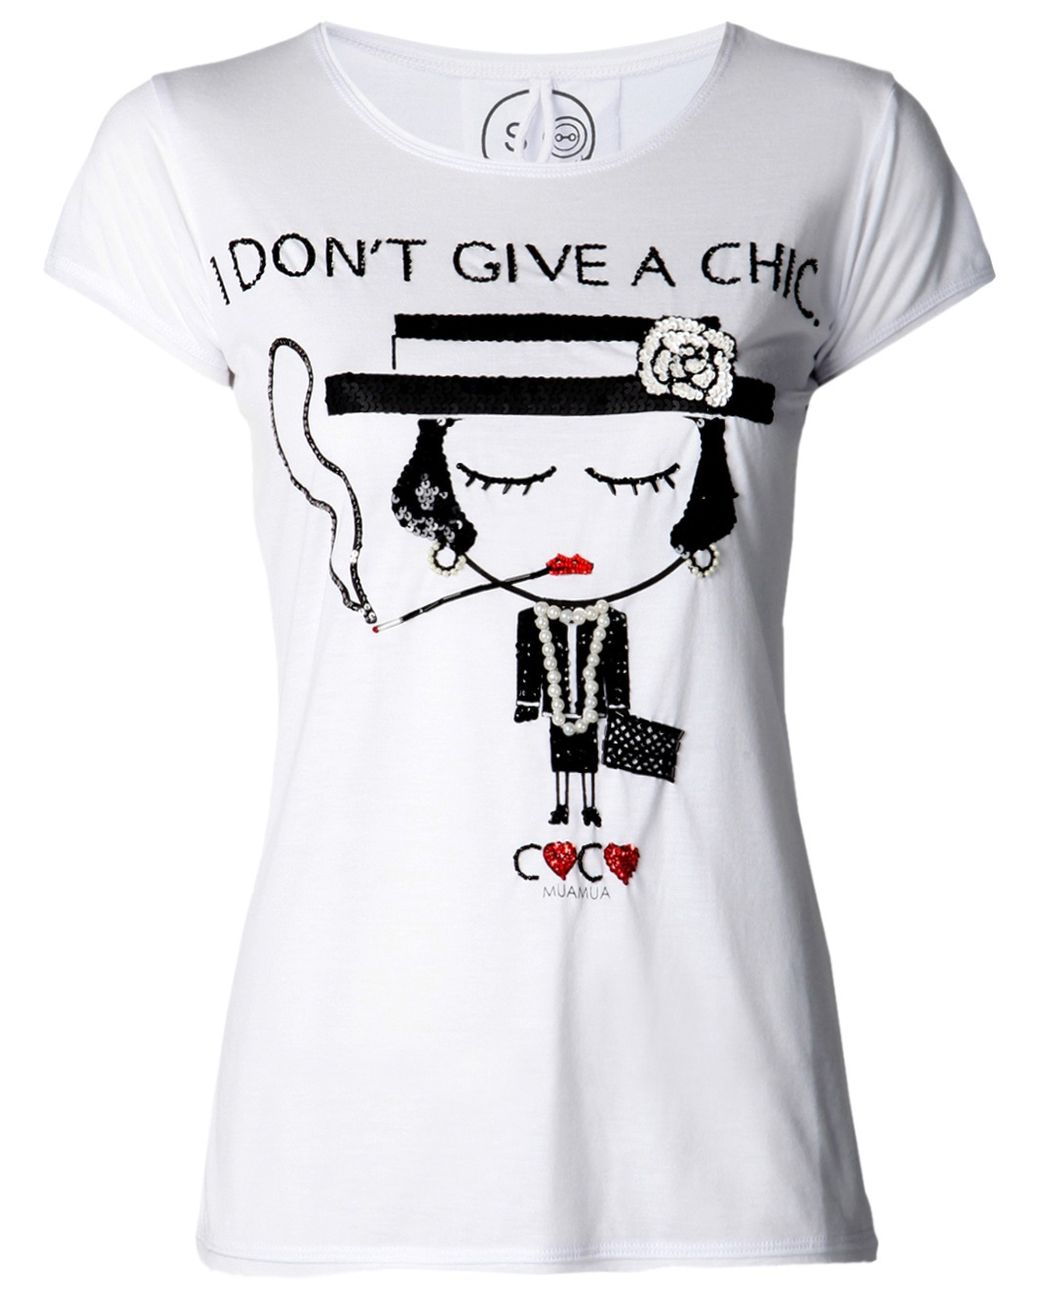 Coco Chanel quote watercolor T-Shirt